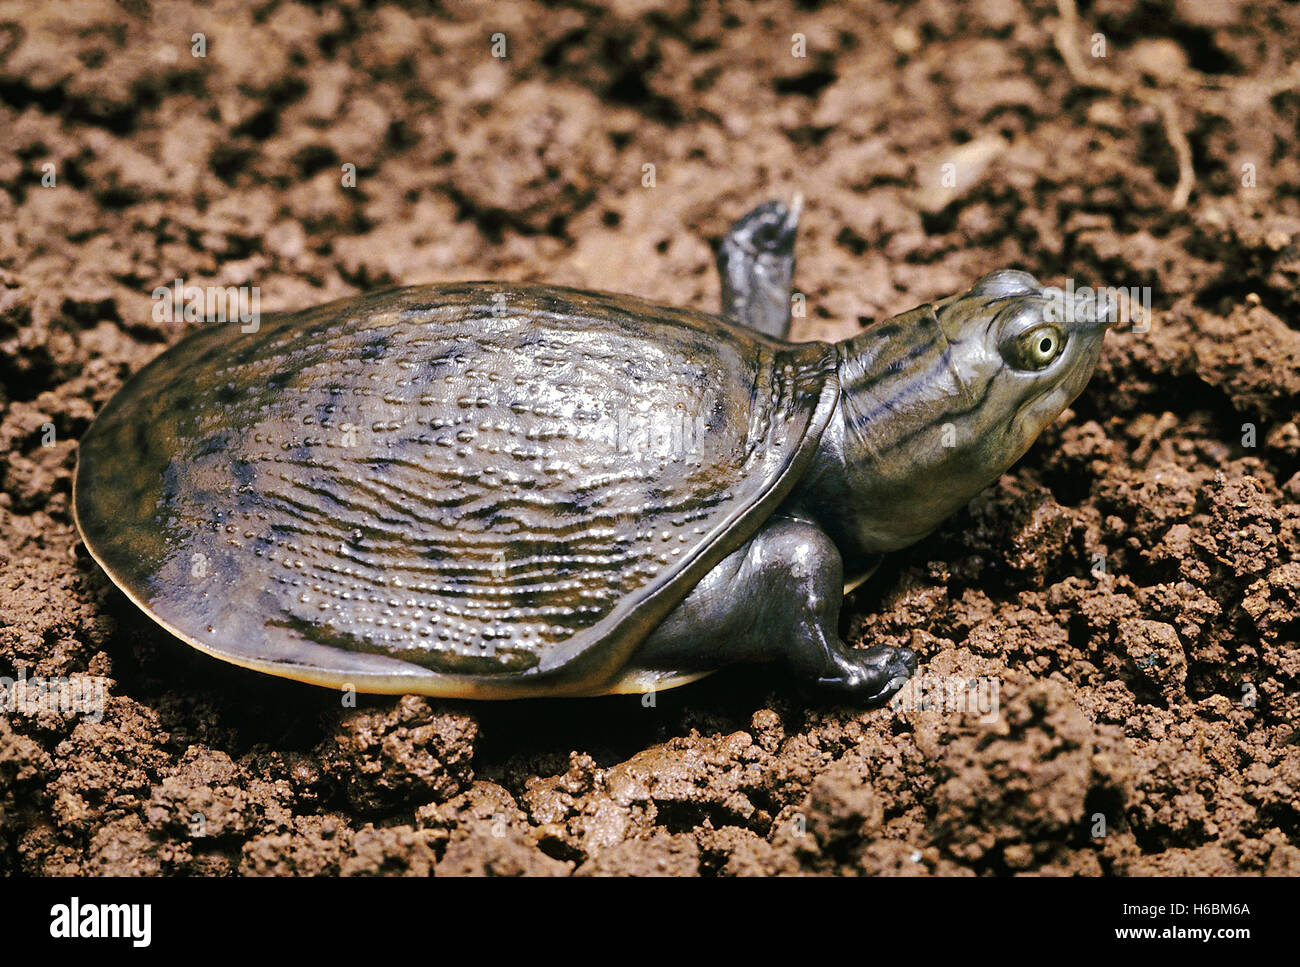 Lissemys Punctata. Indian Flapshell turtle. This turtle has a leathery carapace. It is found in ponds, rivers and lakes Stock Photo